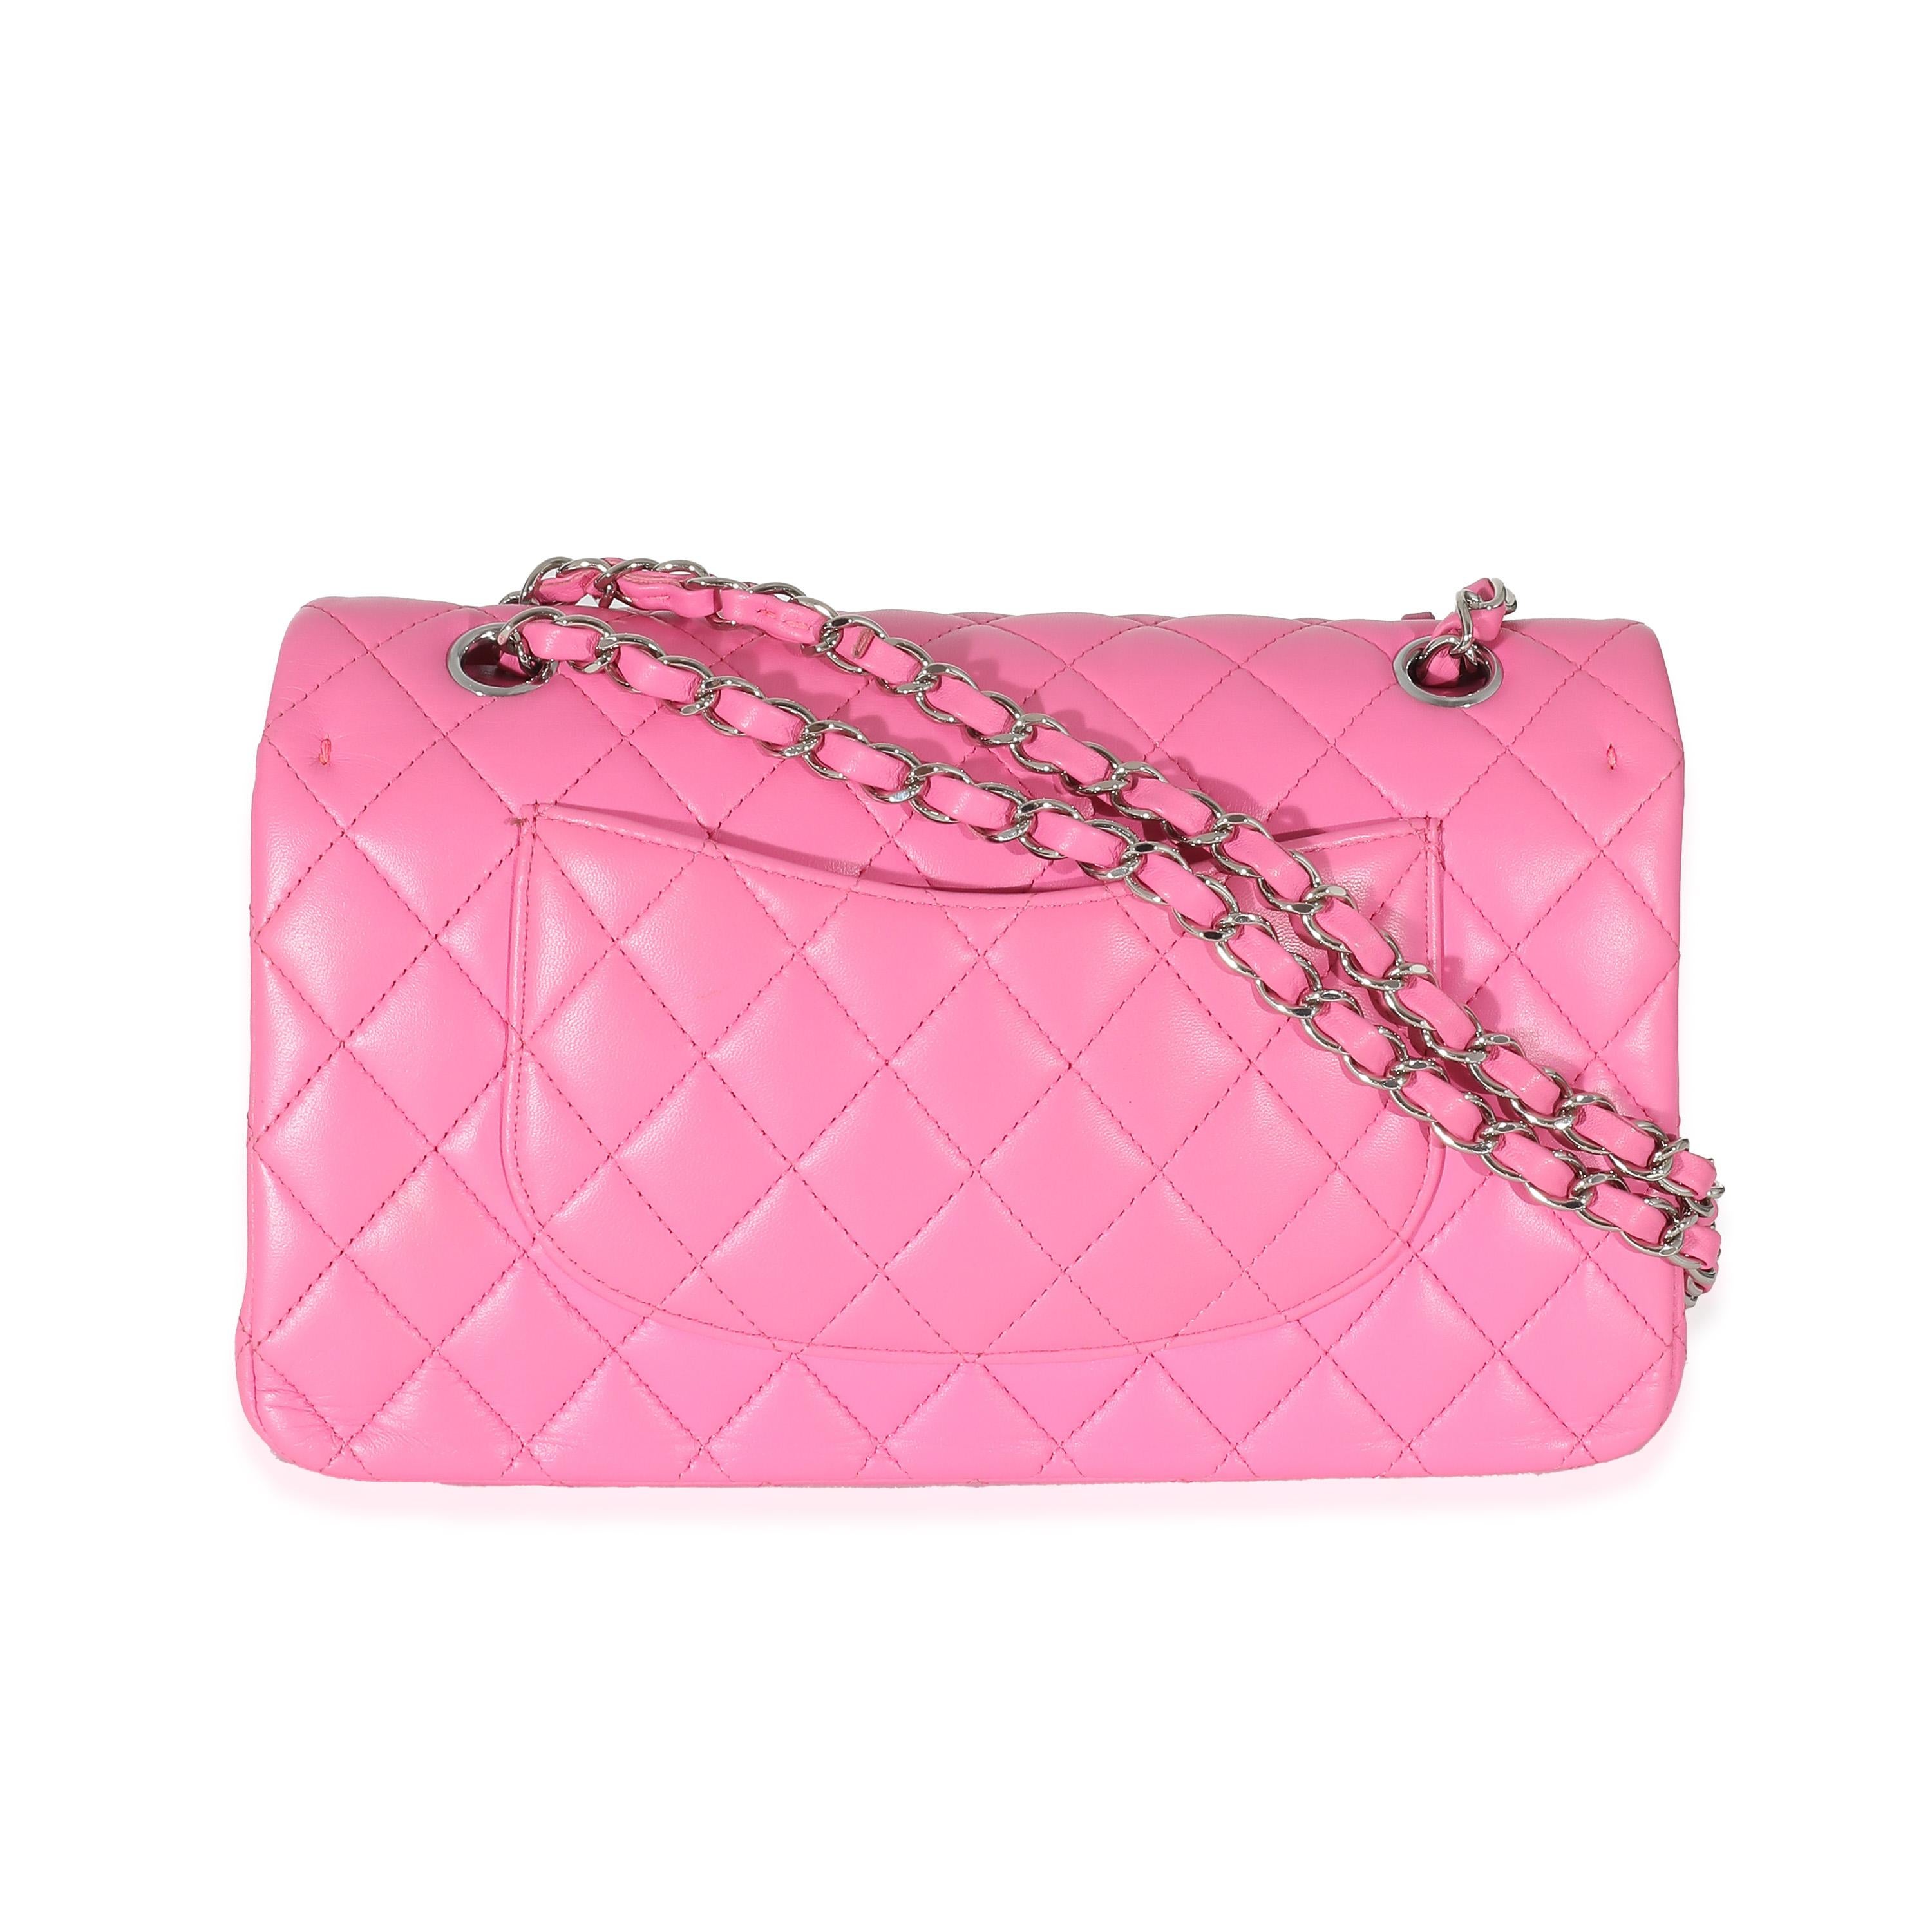 Chanel Pink Quilted Lambskin Medium Classic Double Flap Bag In Excellent Condition For Sale In New York, NY